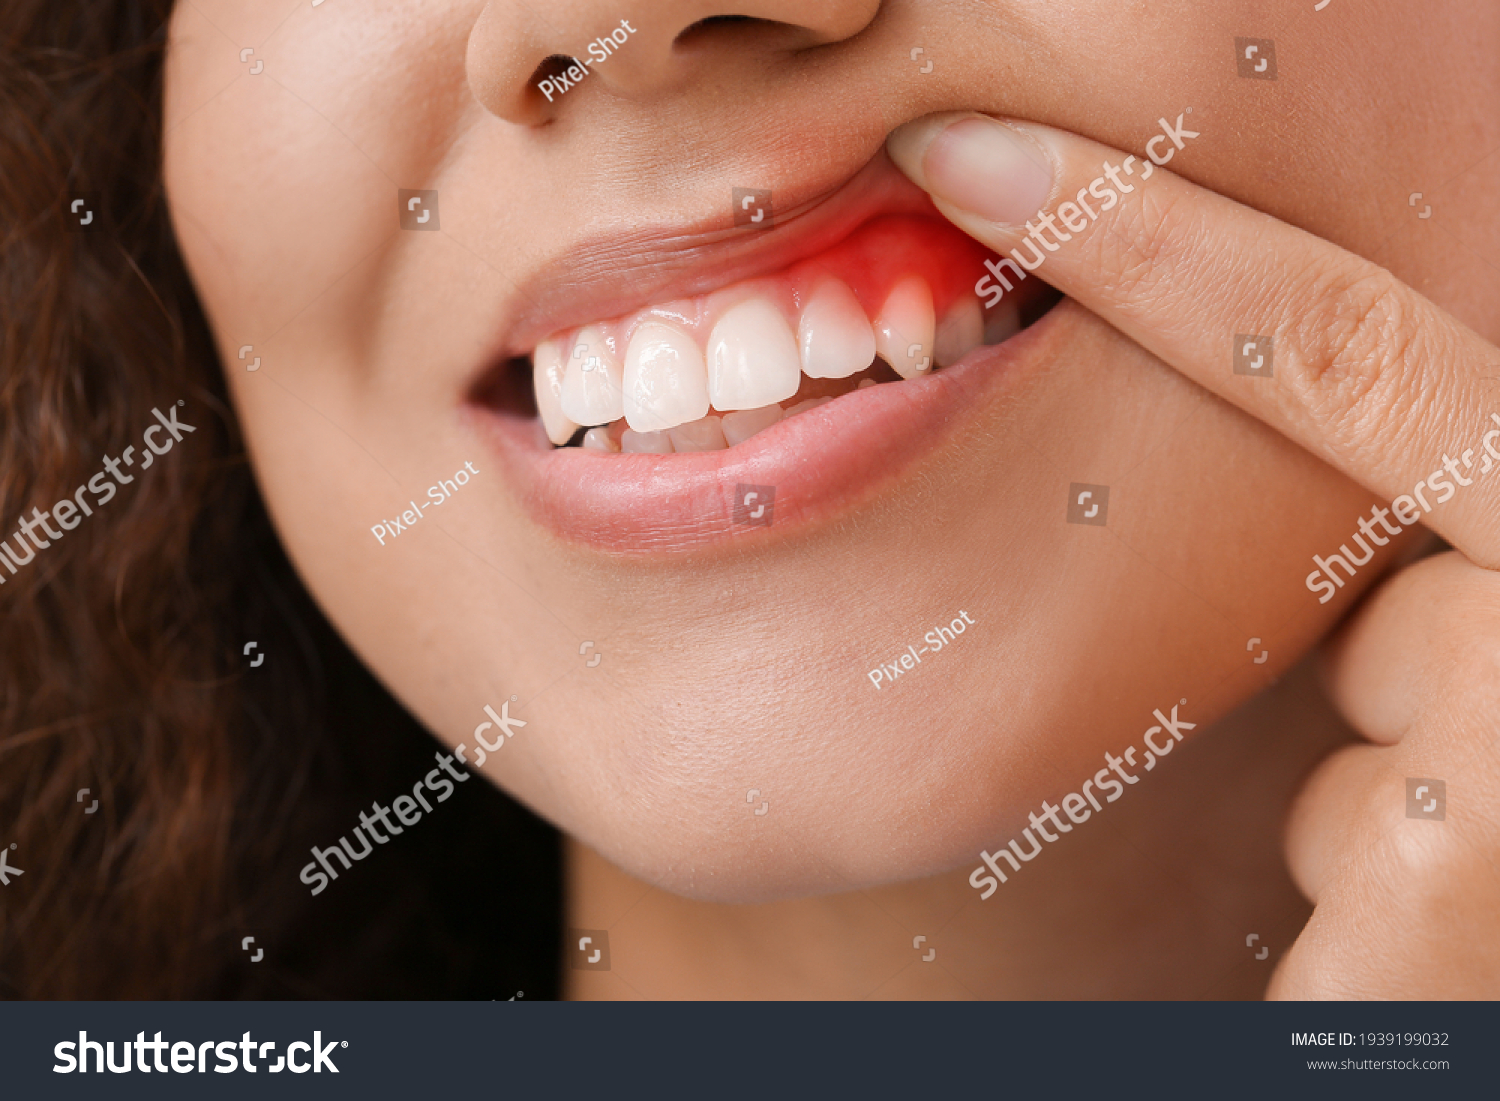 Woman with gum inflammation, closeup #1939199032